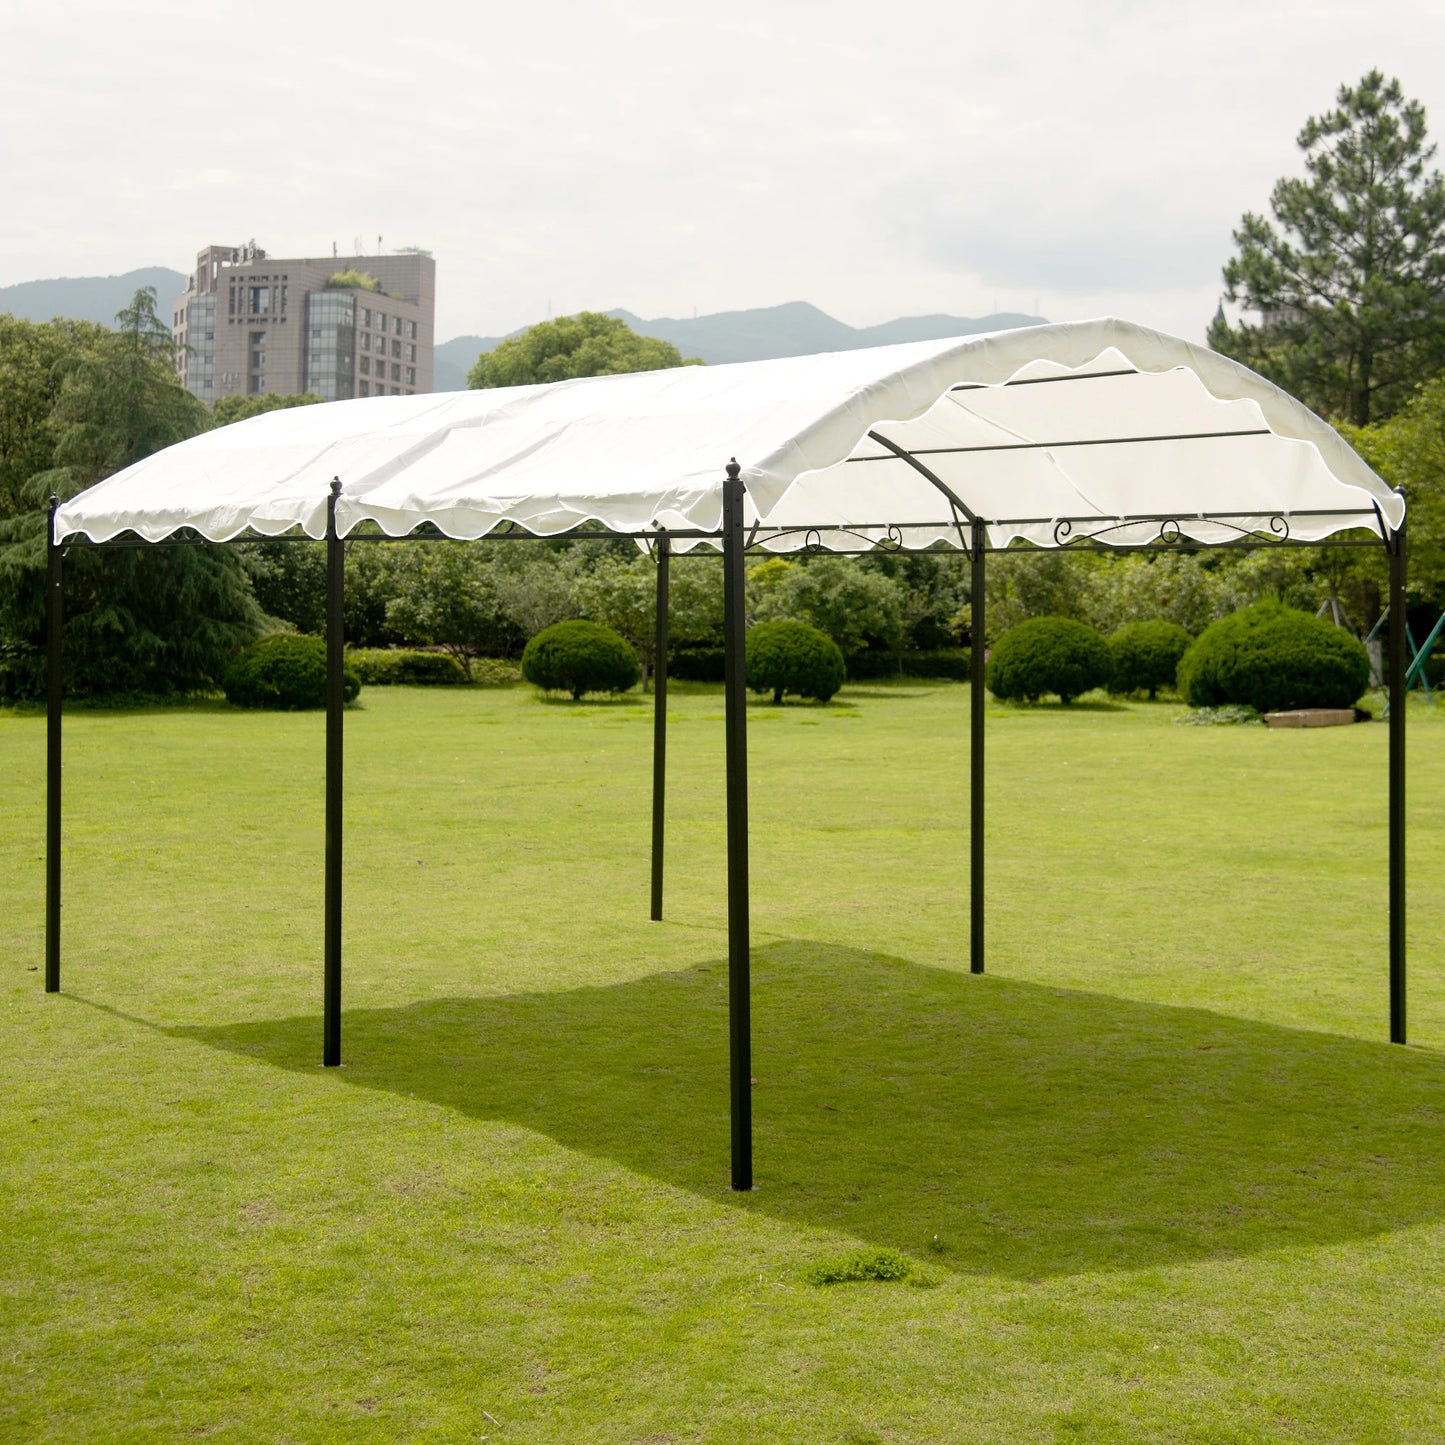 Outdoor Patio 13ft.L x 10ft.W Iron Carport Shelter